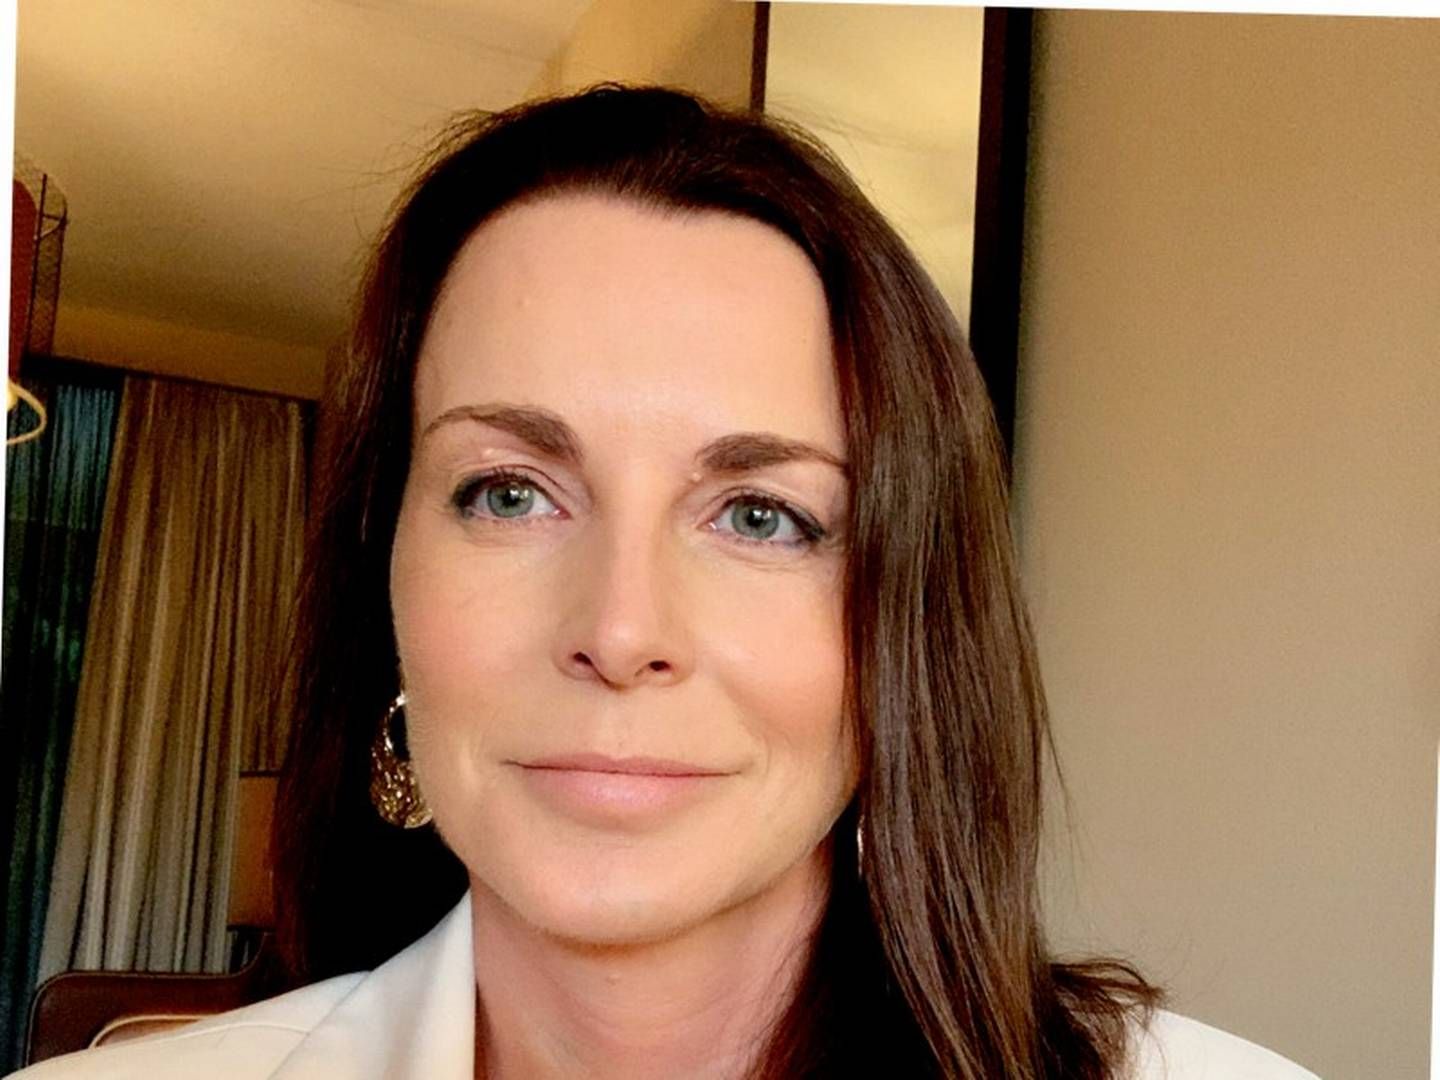 Former Leo Pharma profile Monica Shaw has resigned from her position as CEO of Swedish Oncopeptides to take on a leadership role in a "large pharmaceutical company." | Photo: Privat / Linkedin